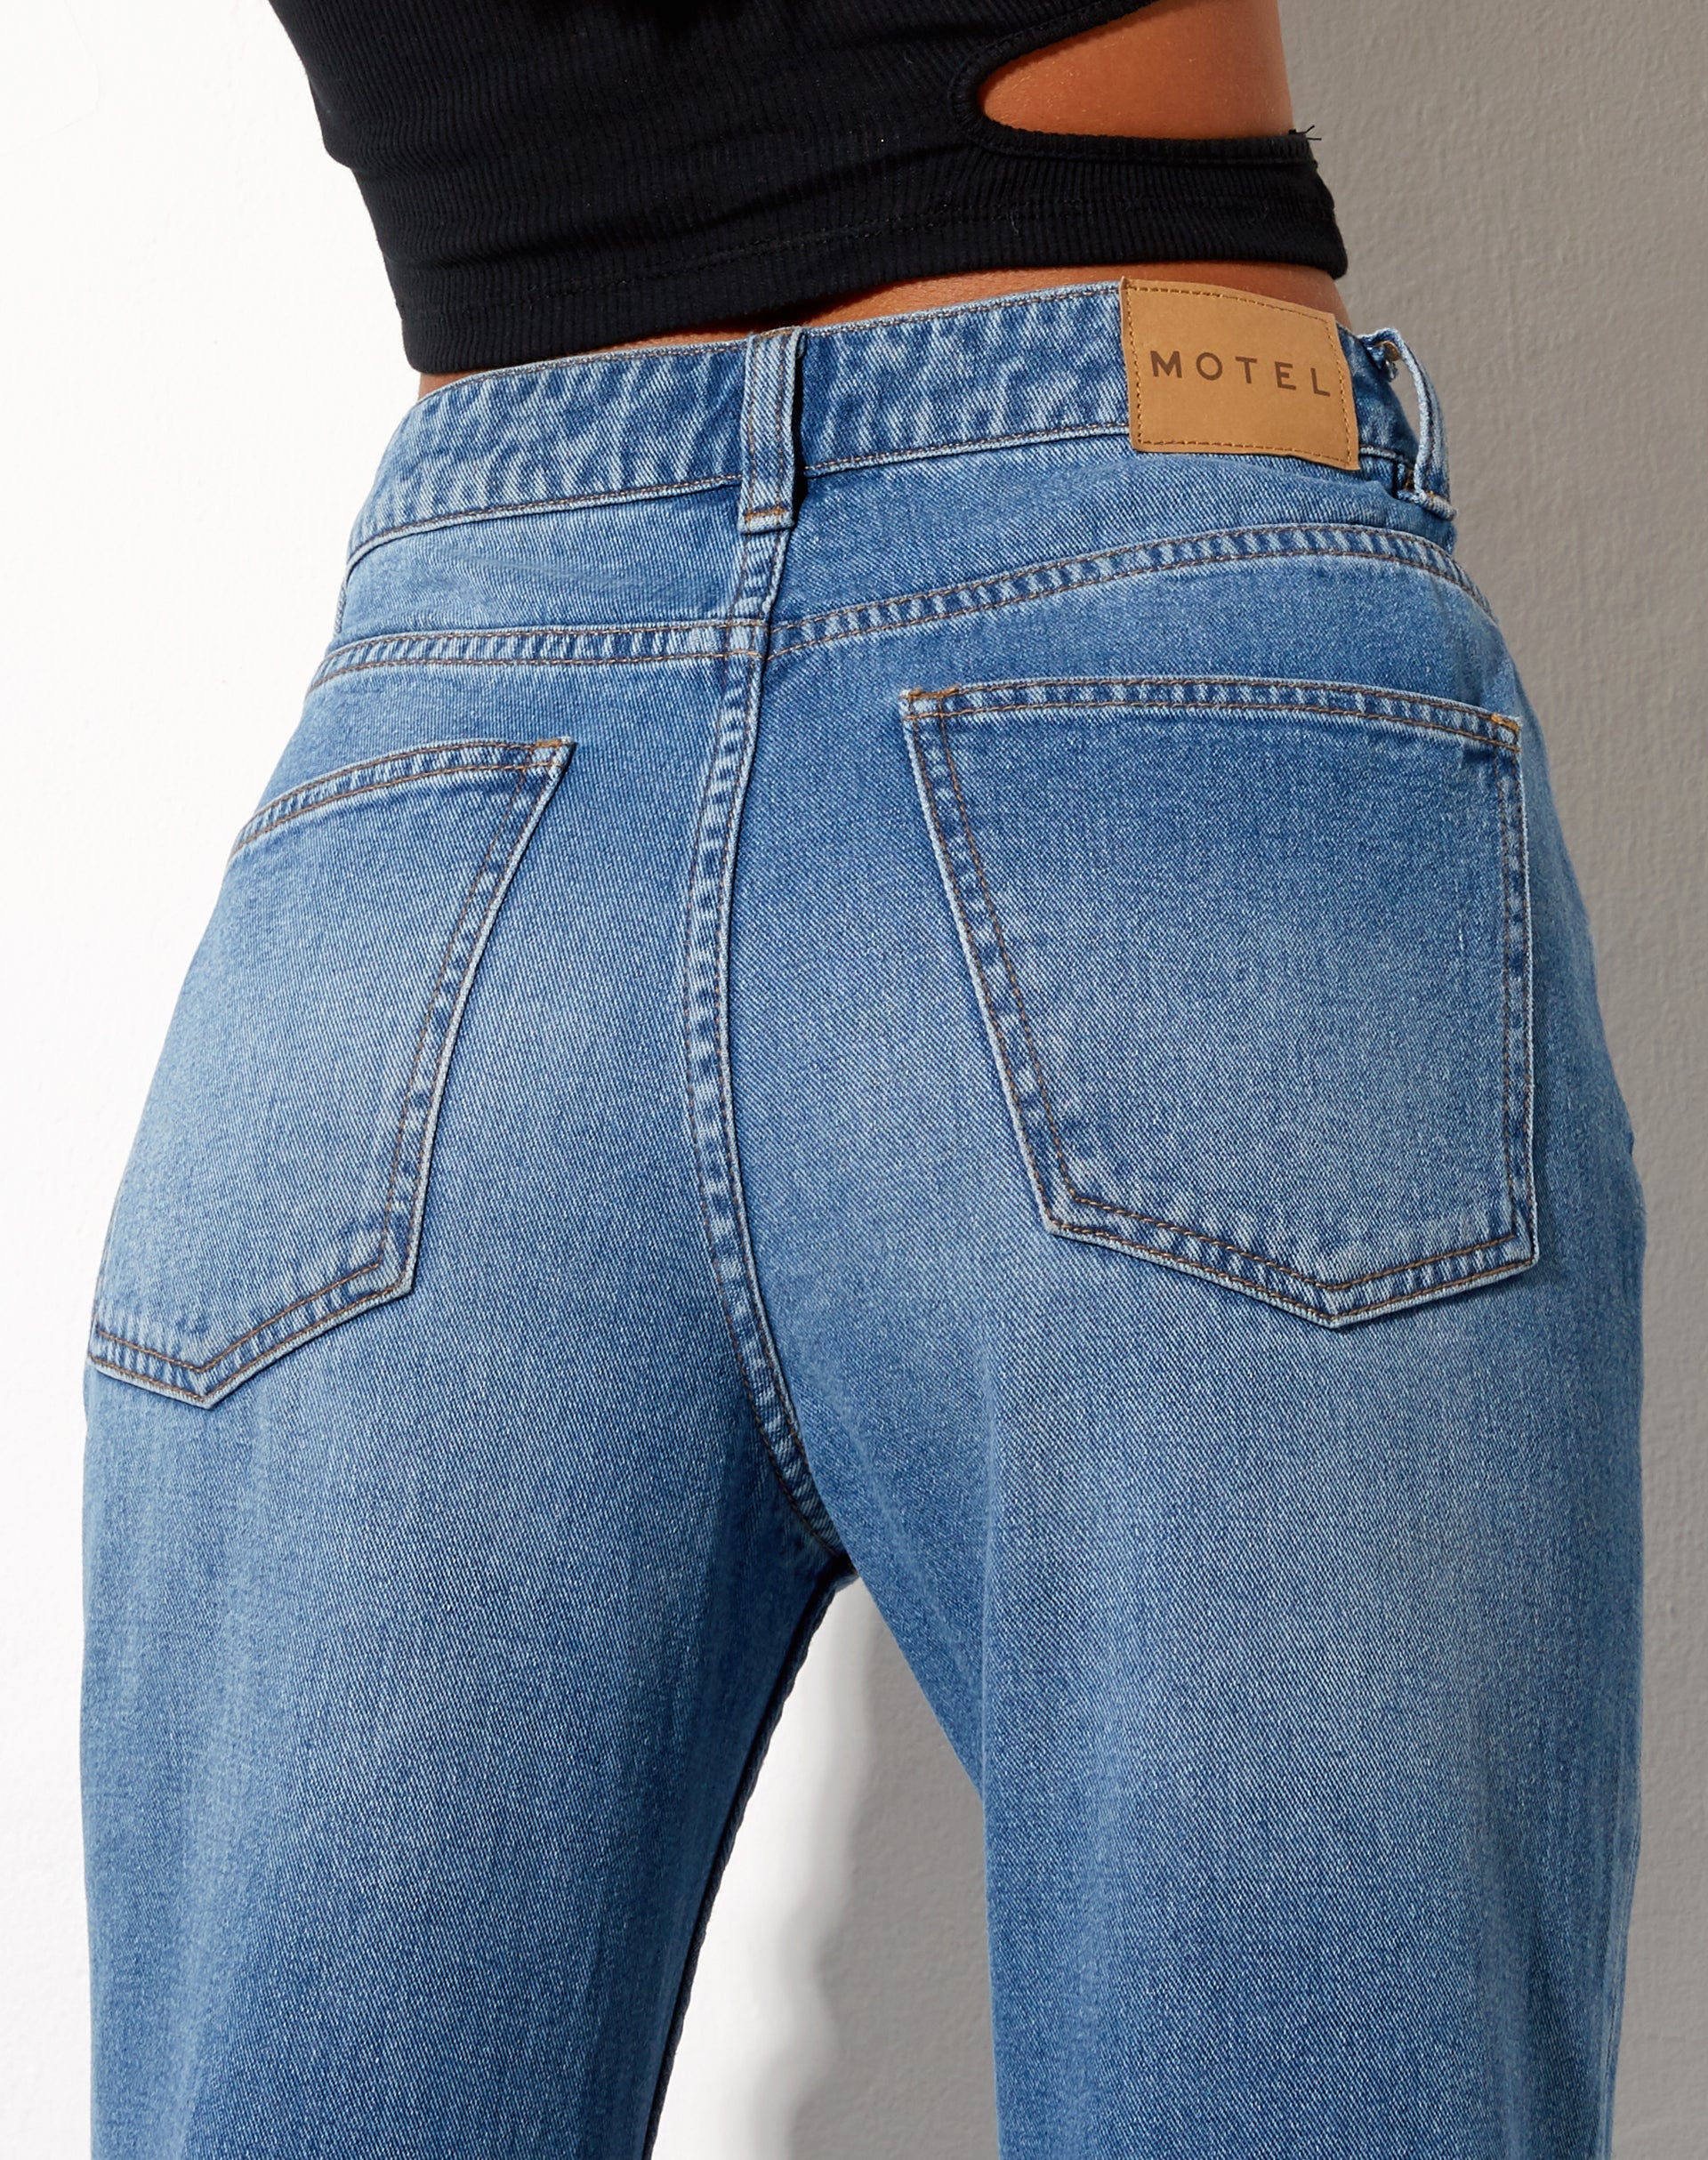 Image of Low Slung Jeans in Blue Wash